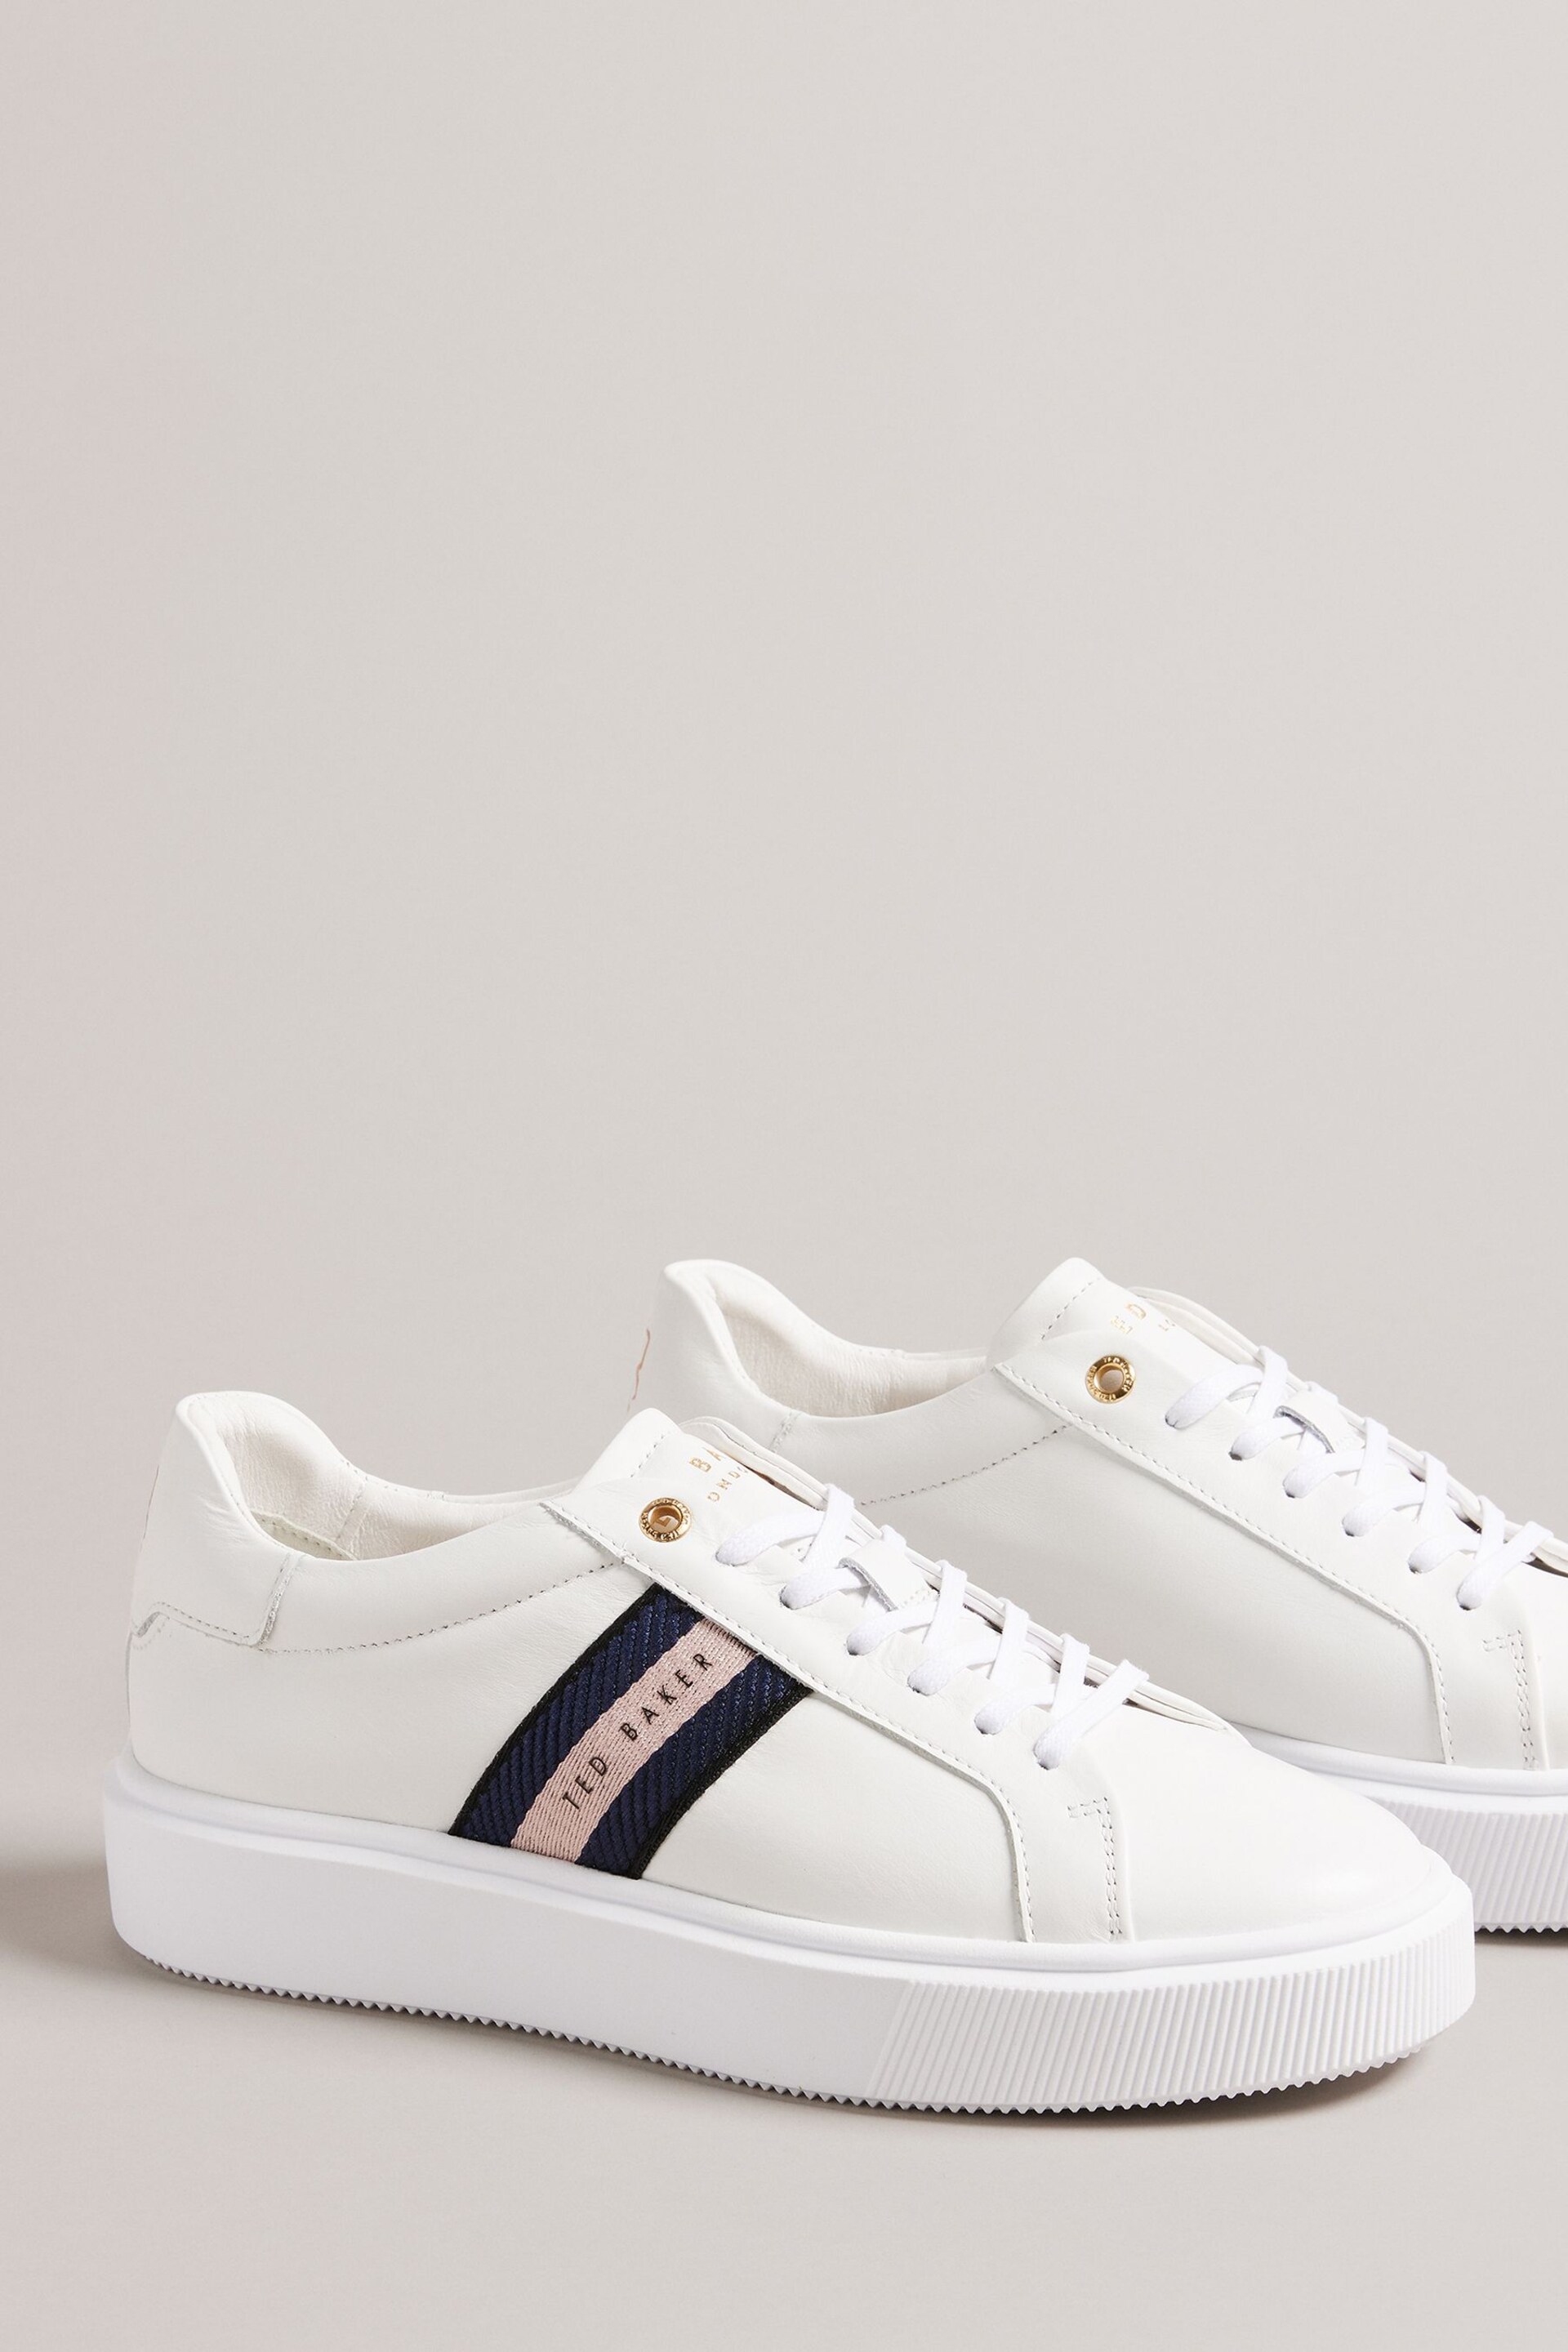 Ted Baker White Platform Lornie Webbing Trainers - Image 2 of 5